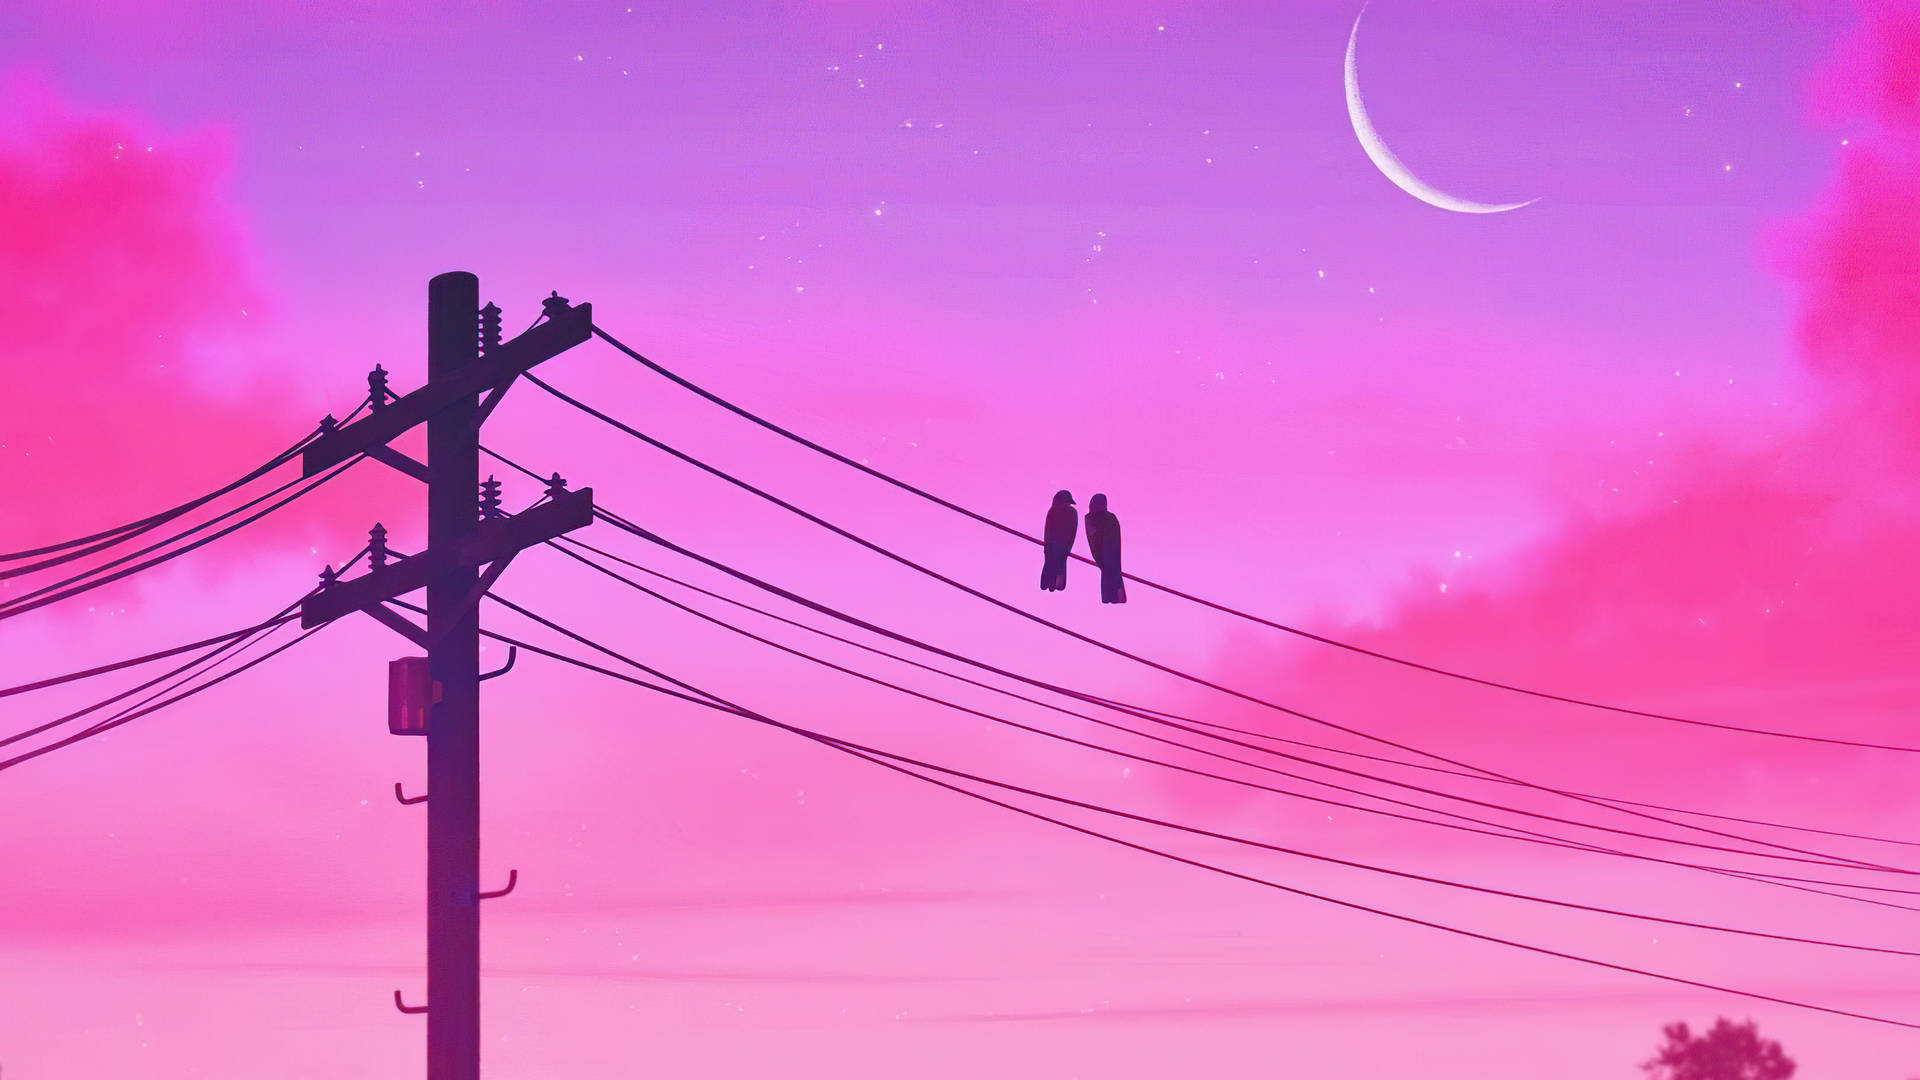 Crescent Aesthetic Moon And Love Birds Background